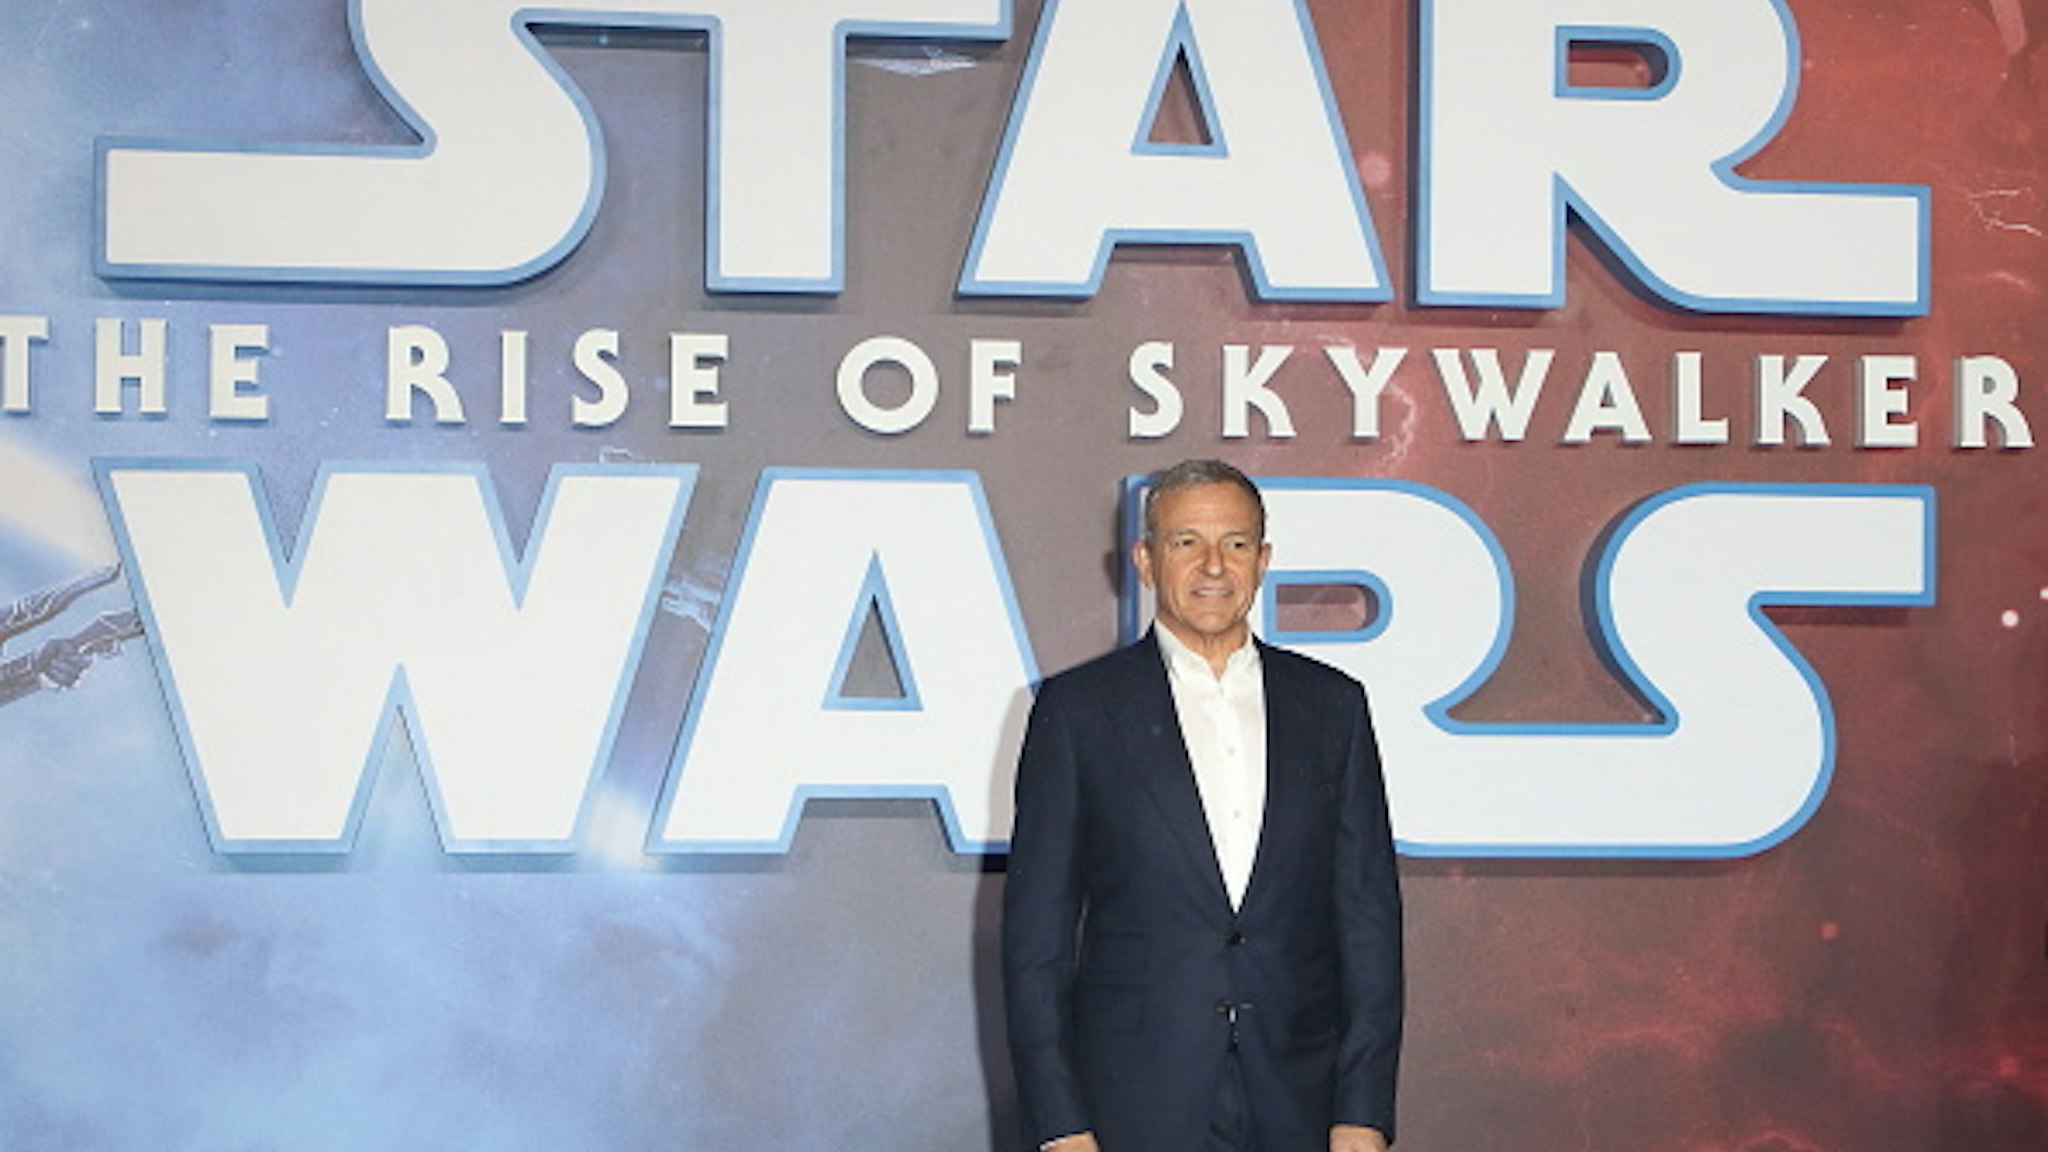 LONDON, UNITED KINGDOM - DECEMBER 18 2019: Bob Iger attends the "Star Wars: The Rise of Skywalker" European Premiere at Cineworld Leicester Square in London.- PHOTOGRAPH BY Keith Mayhew / Echoes Wire/ Barcroft Media